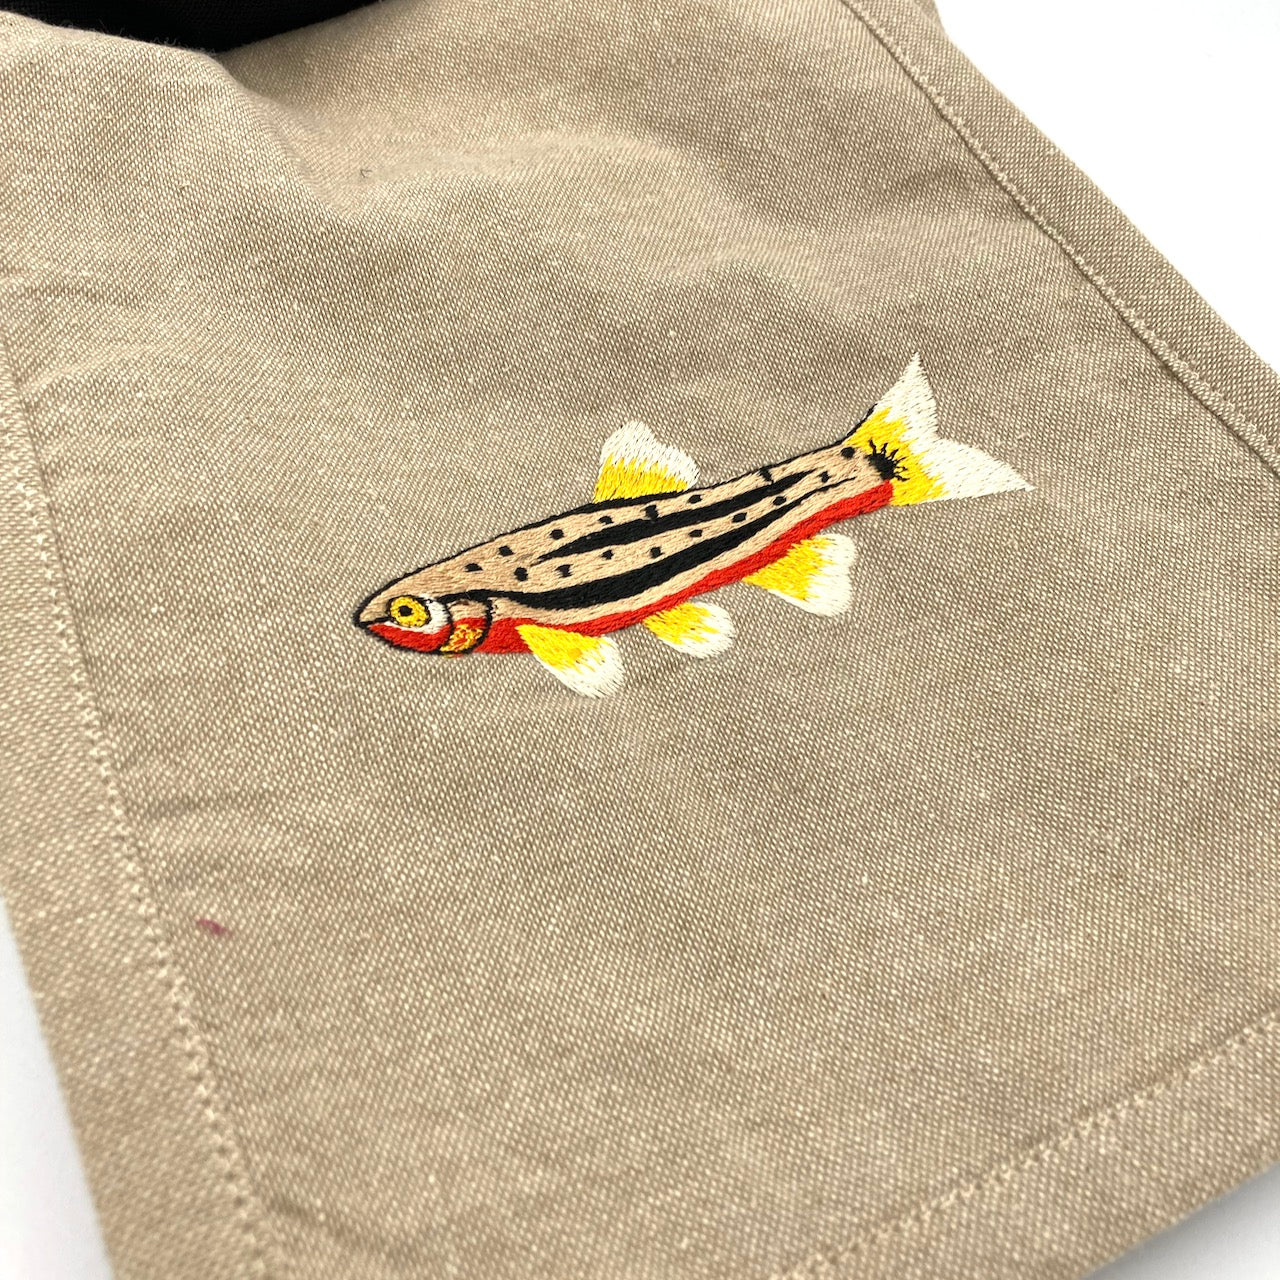 Northern Redbelly Dace Field Bag